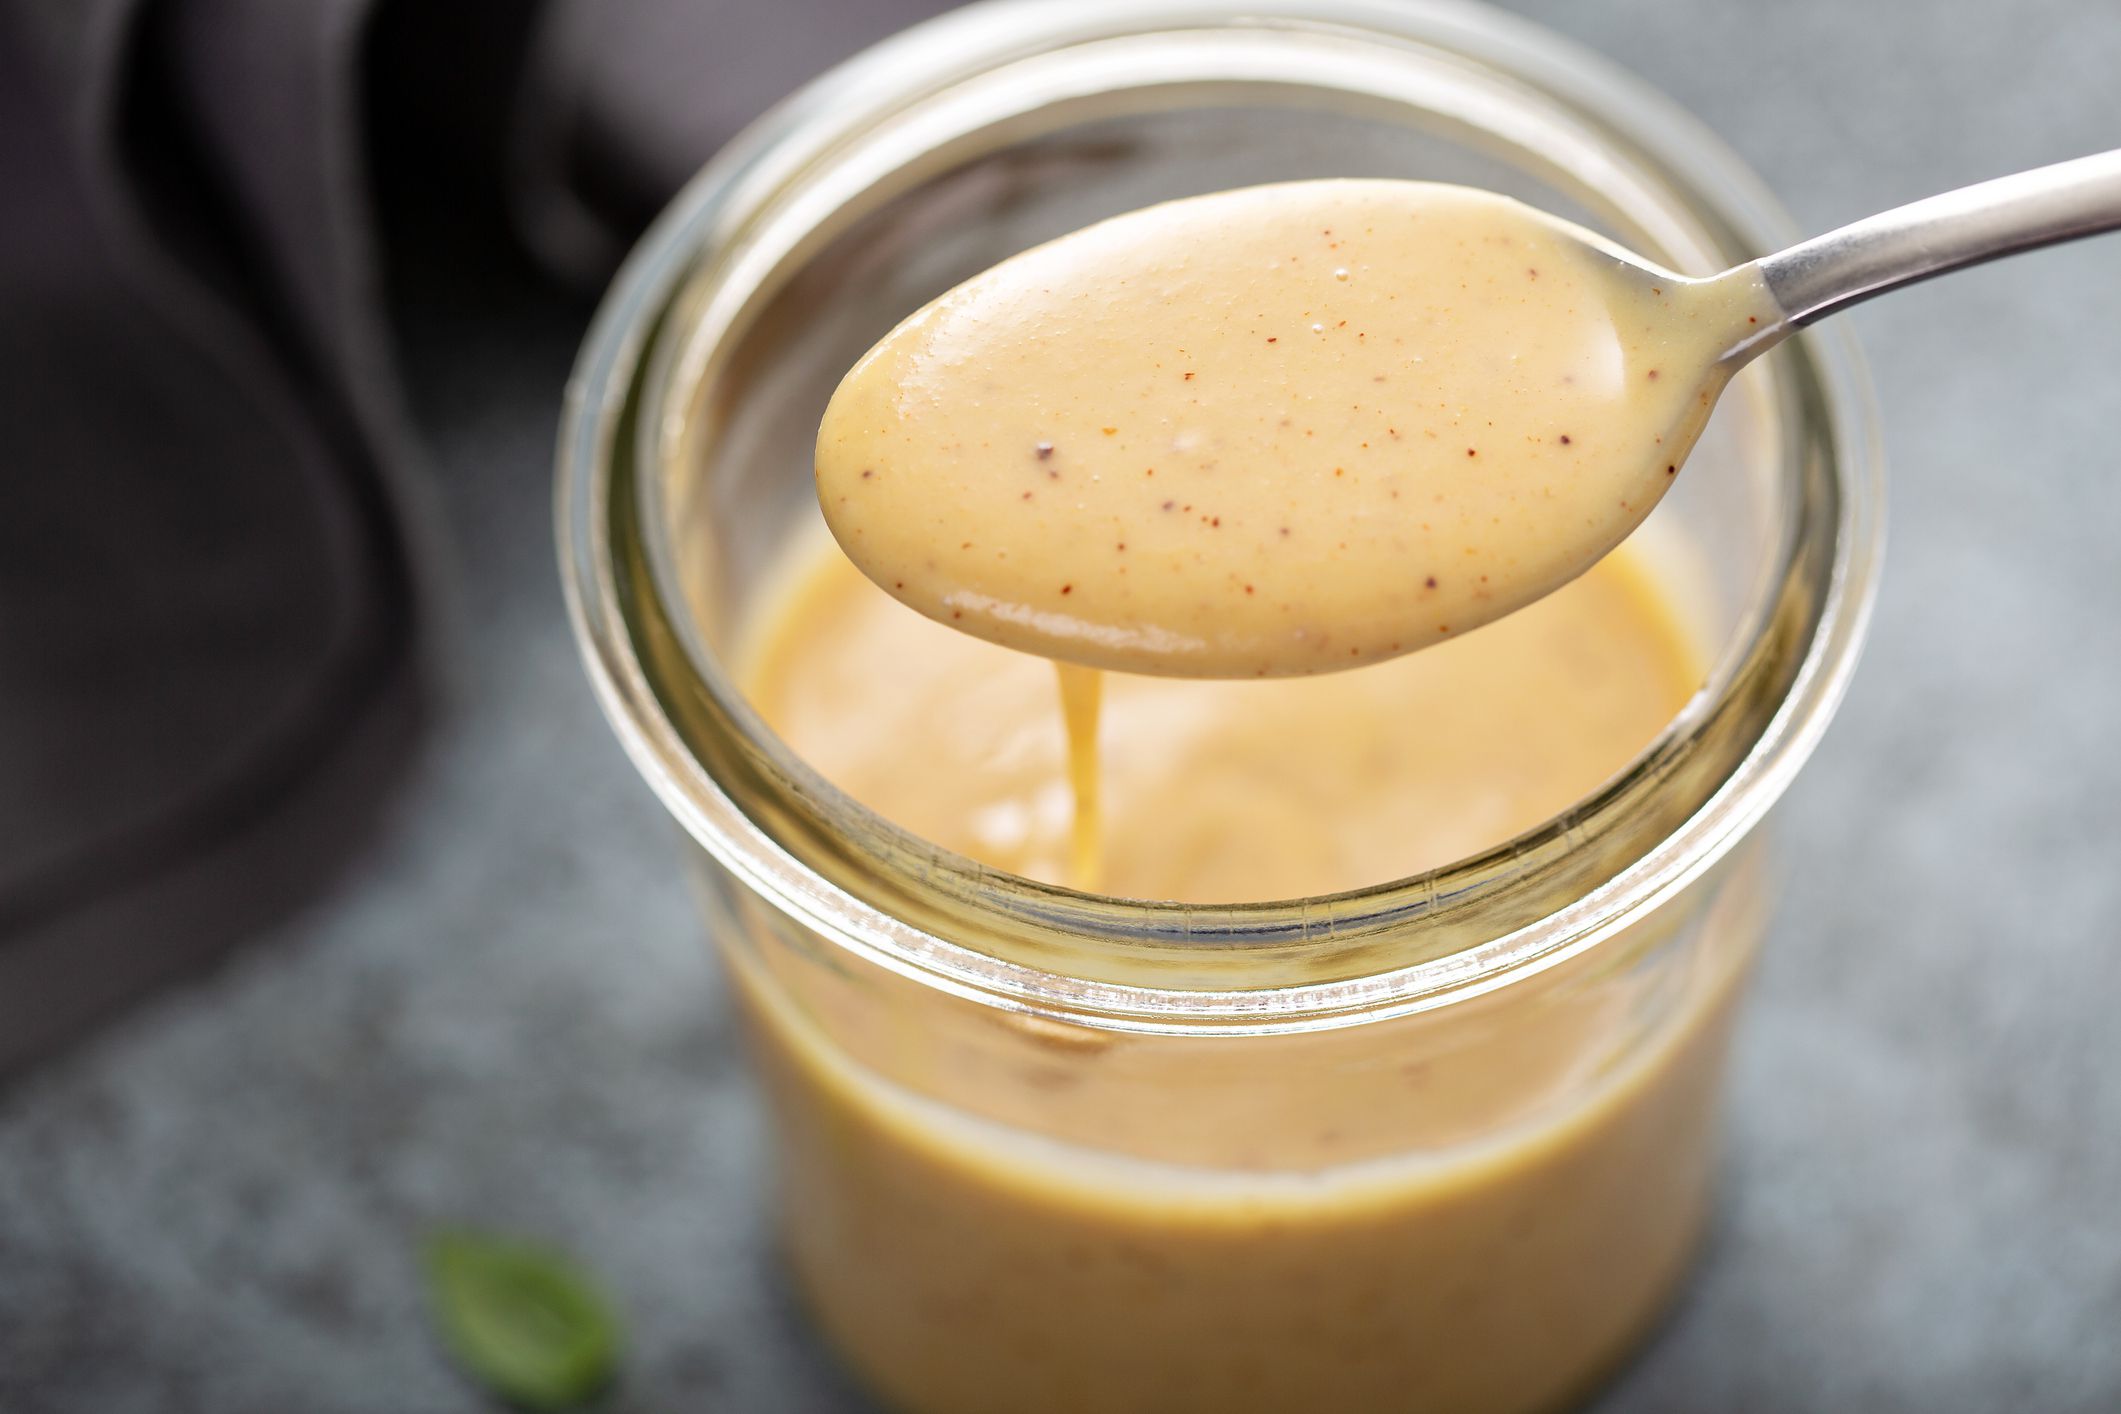 11 Easy and Delicious Salad Dressings You Can Make at Home